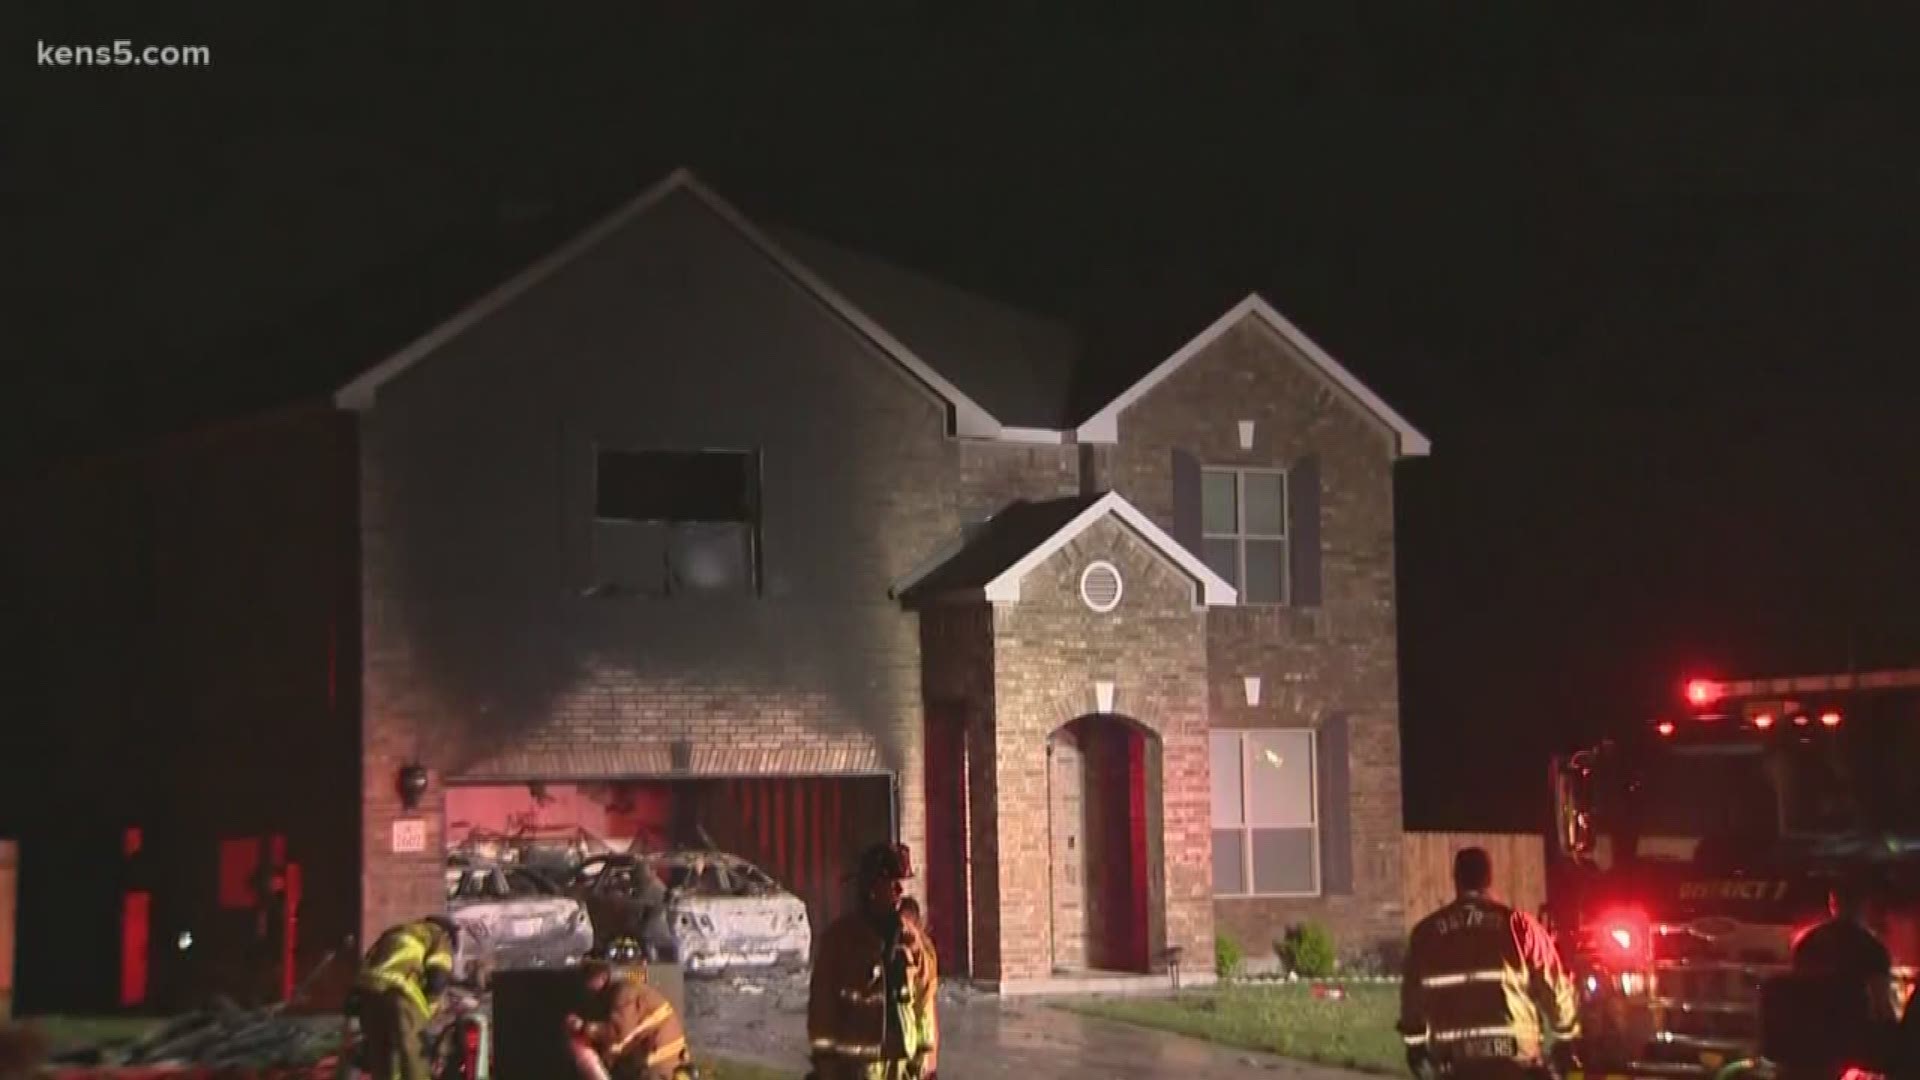 A garage fire sparked by an electric car spreads to home in west Bexar County.